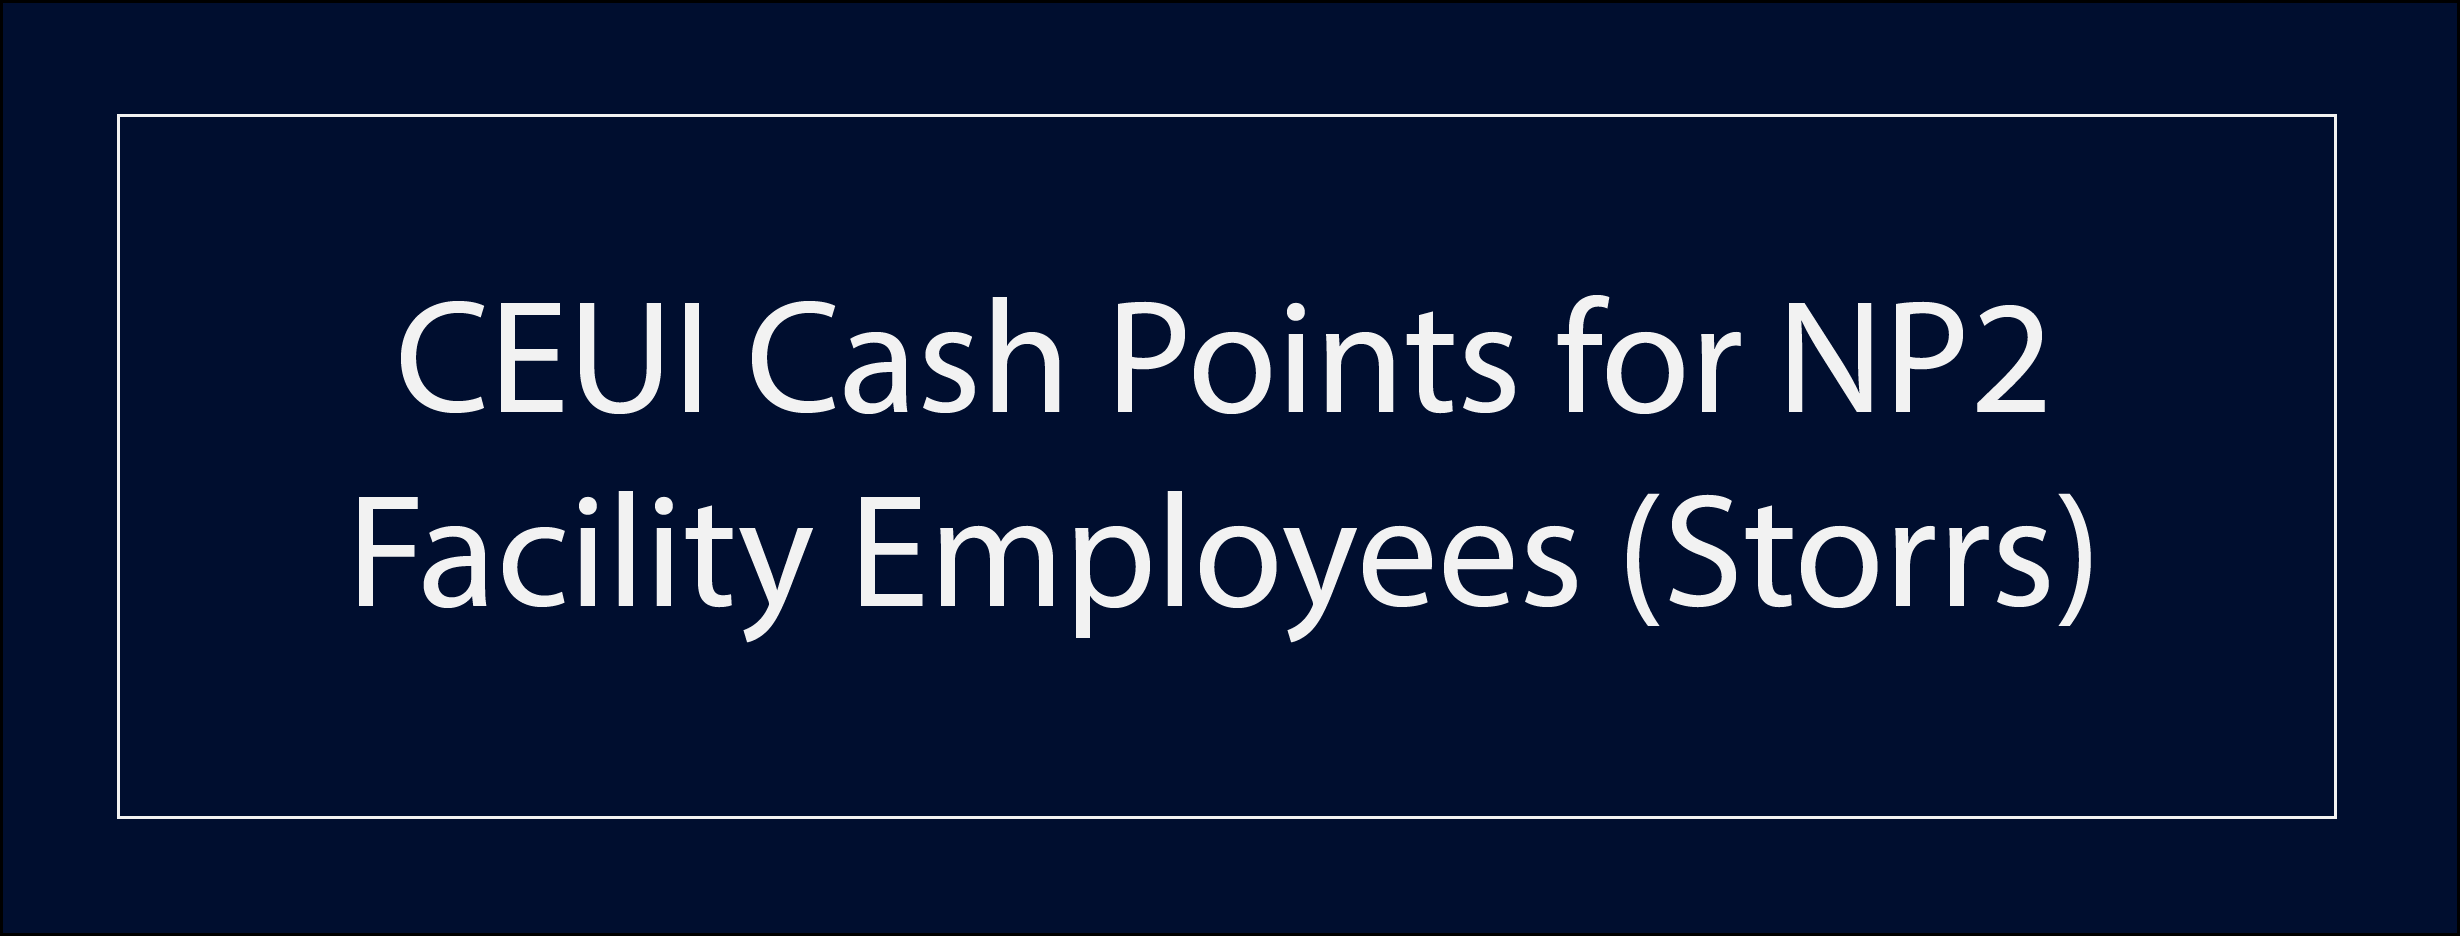 CEUI Cash Points for NP2 Facility Employees at Storrs campus